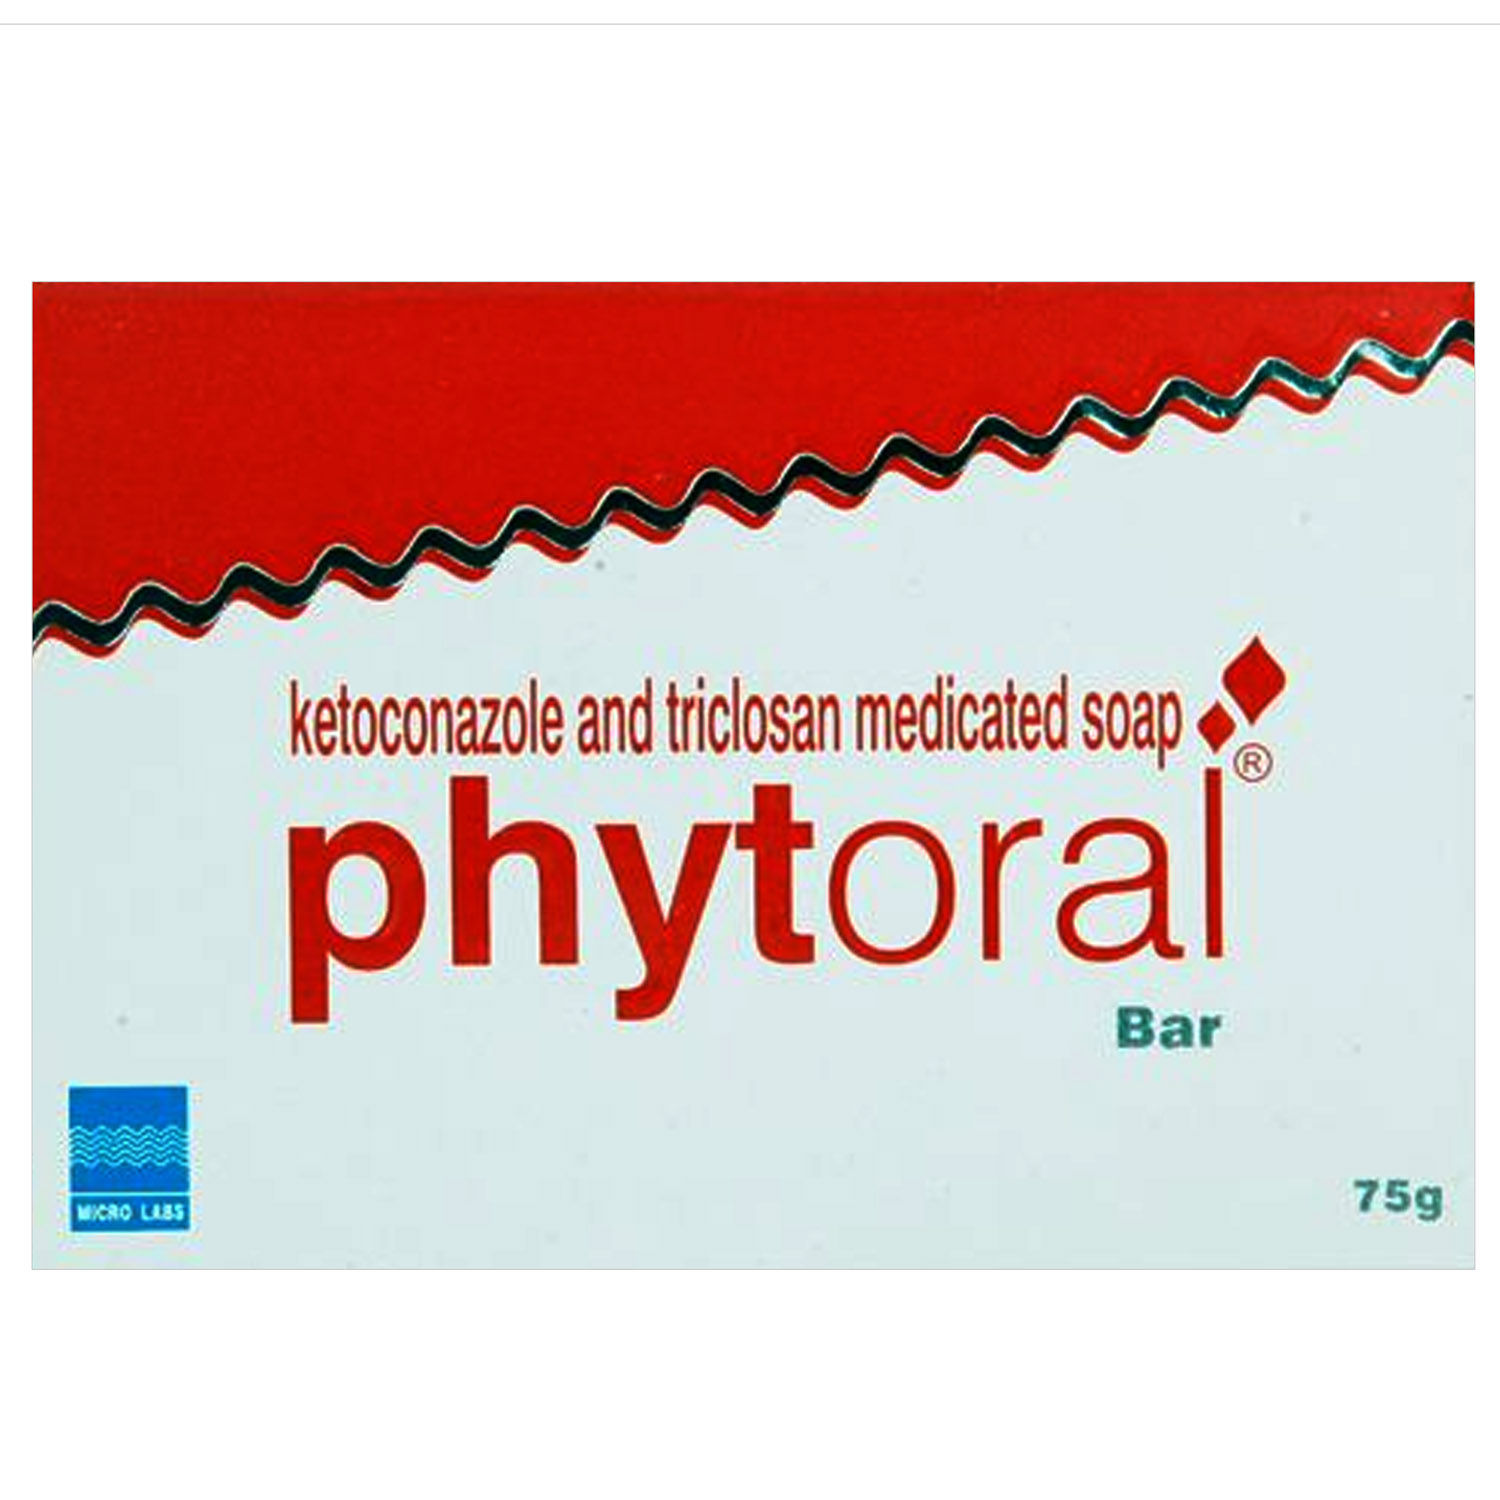 Phytoral Bar, 75 gm, Pack of 1 